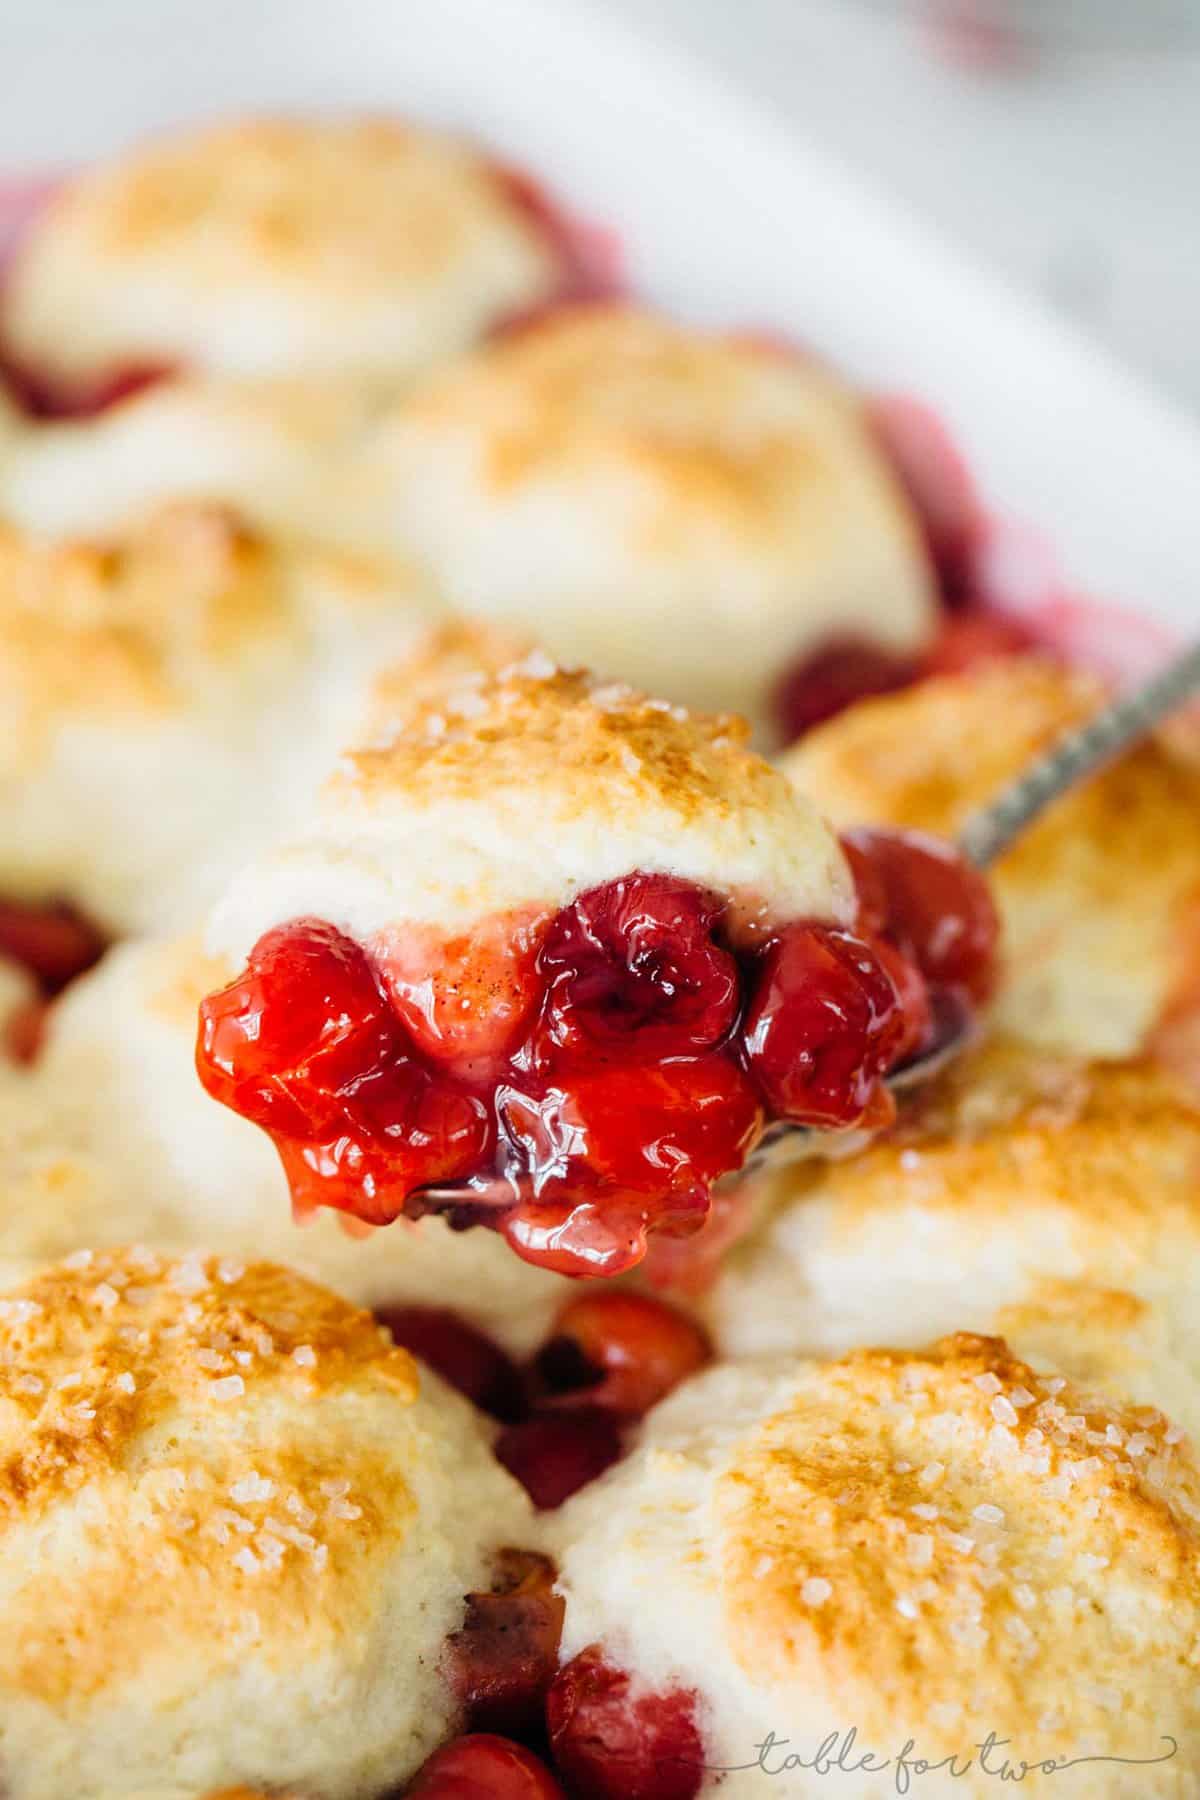 It could not be easier to make a classic sour cherry cobbler right in your own home. Using the seasonal and fresh cherries, this classic sour cherry cobbler comes together quickly and easily! Use any seasonal fruit in this recipe and top with a giant scoop of ice cream for the ultimate dessert!